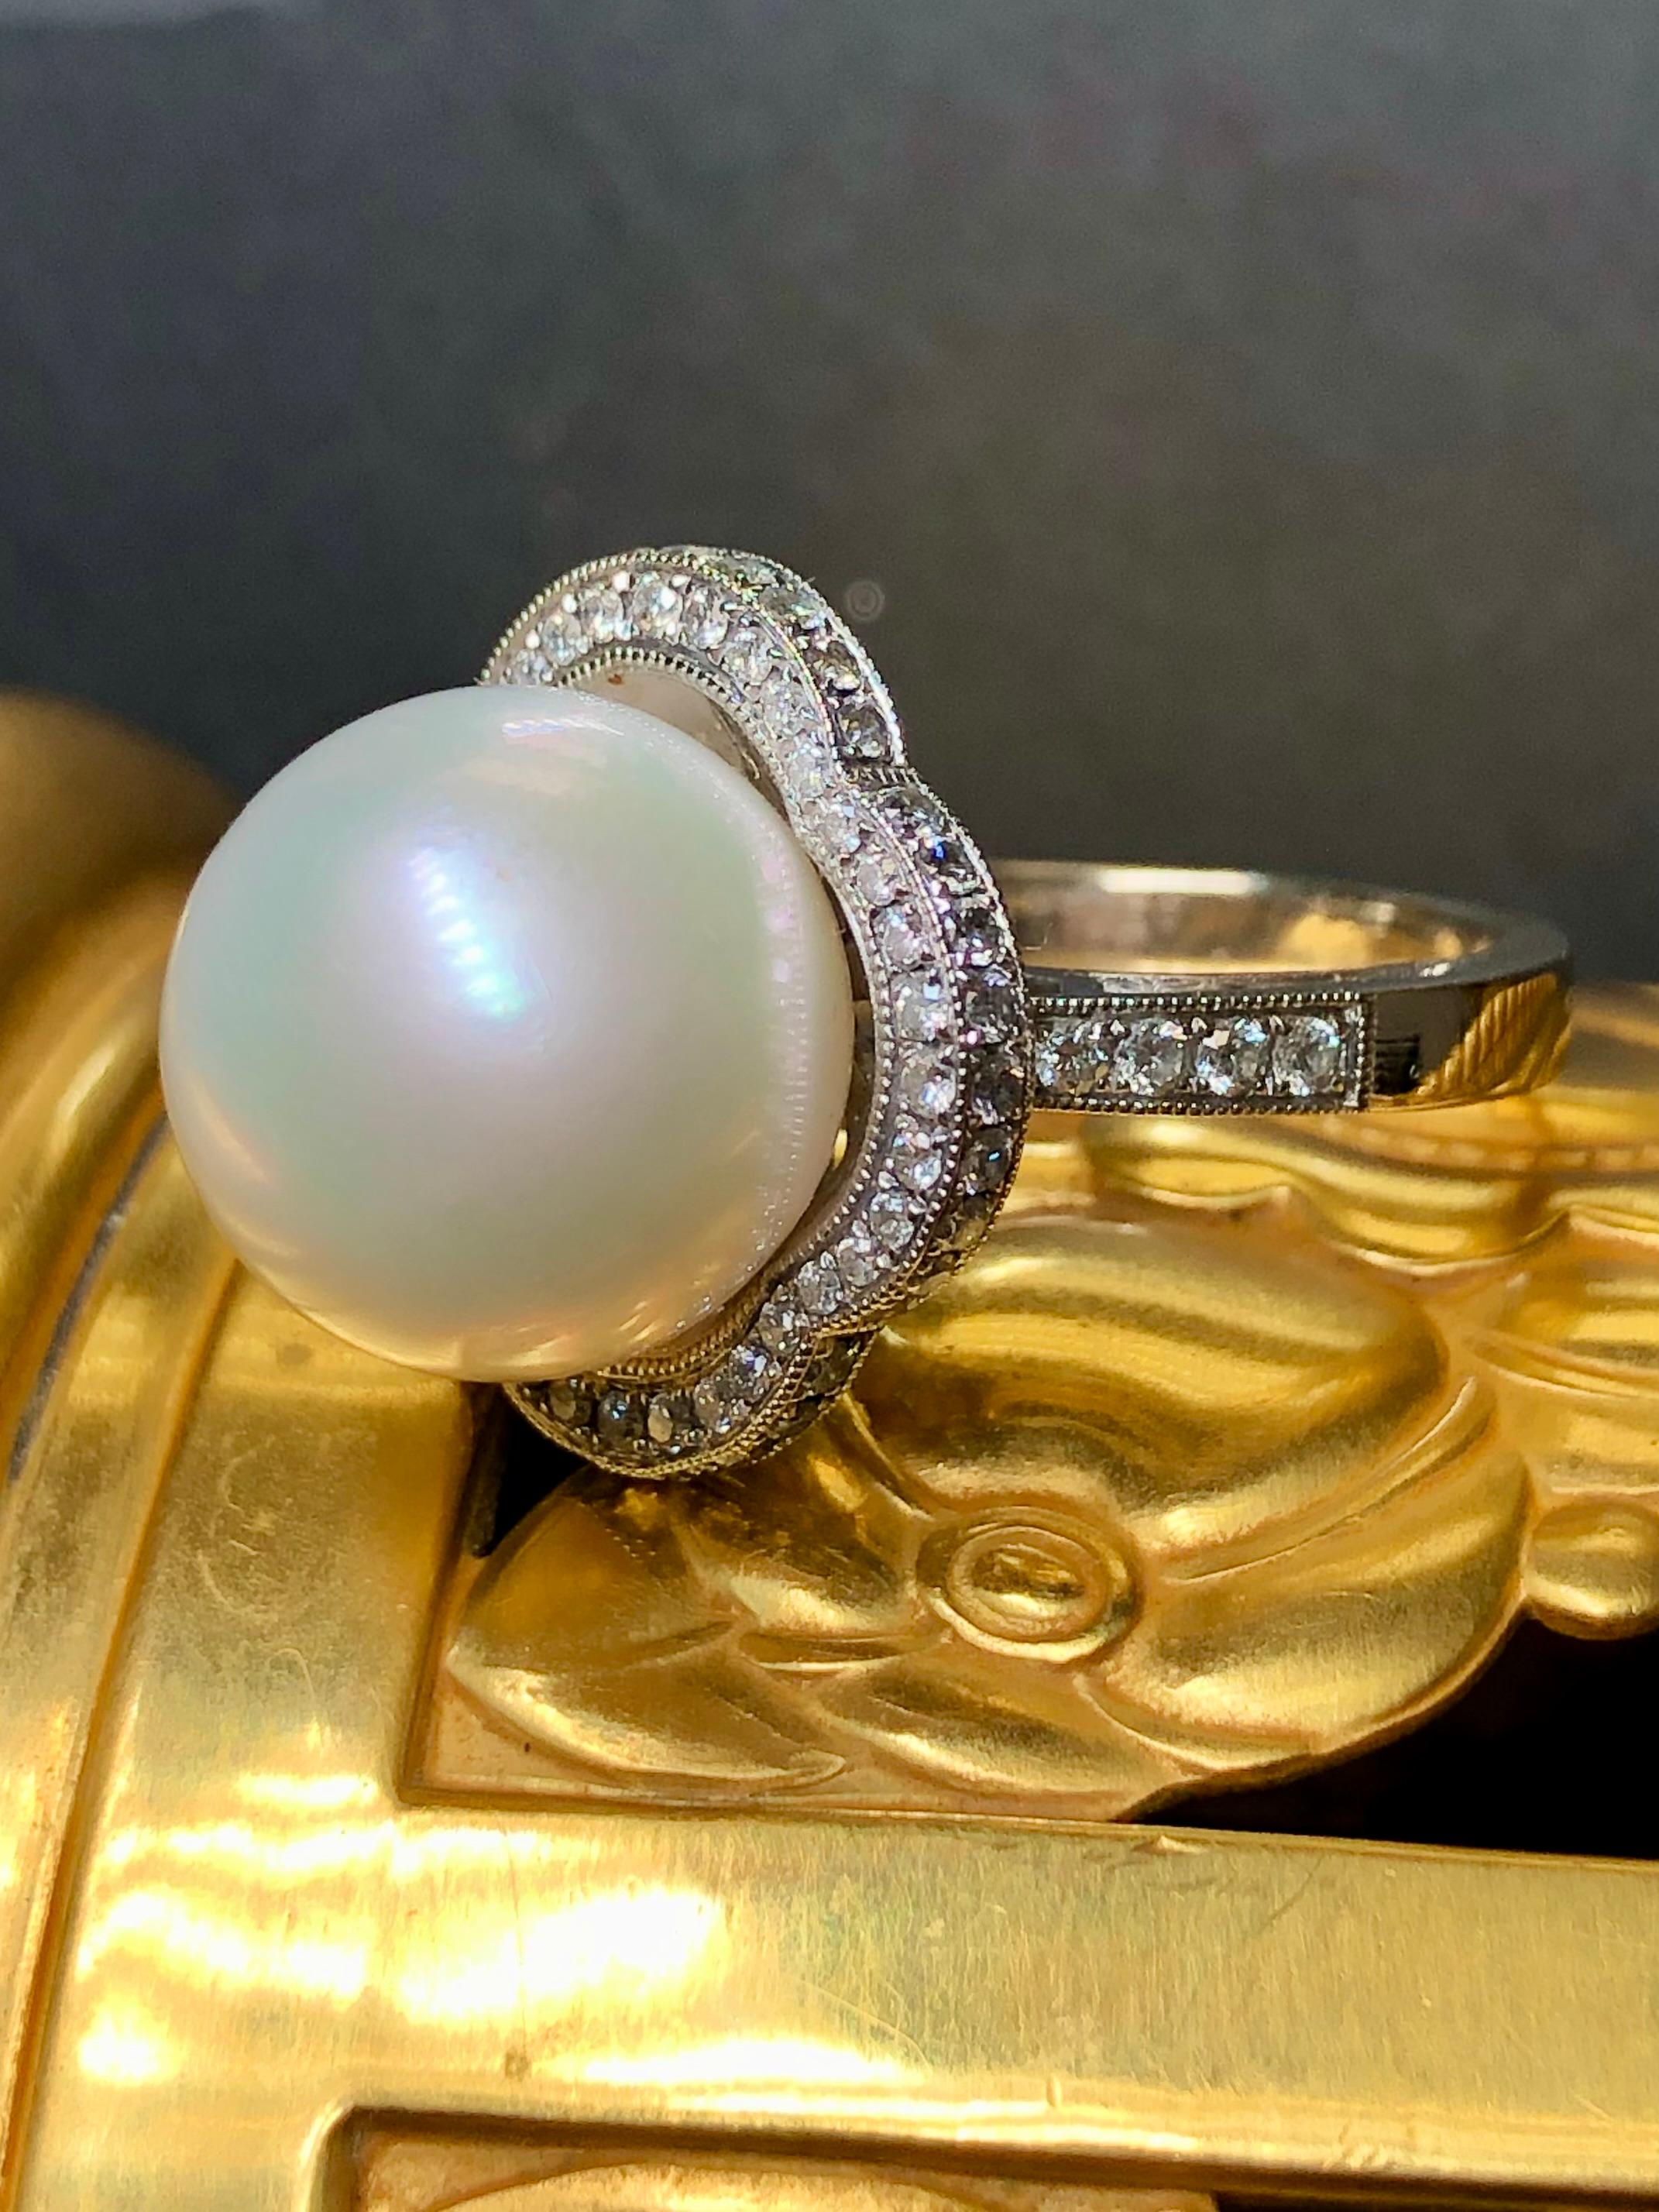 An elegant and timeless ring done in 18K white gold centered by a cream colored 13.4mm large South Sea pearl with very minor pitting and a beautiful, even luster. Bead set around the pearl and on the shoulders of the ring is .73cttw in perfectly